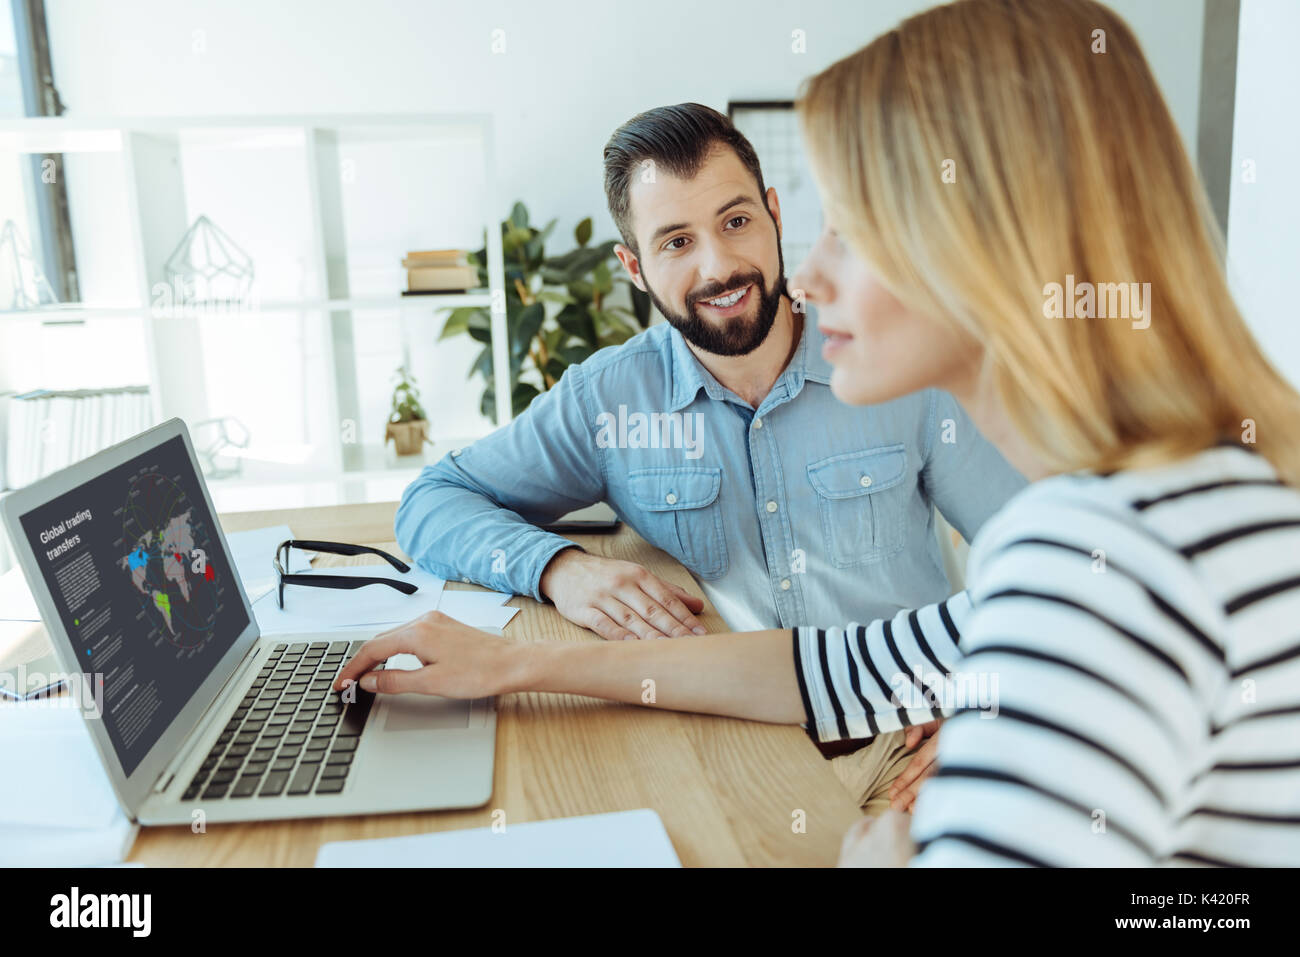 Smiling man watching colleague read infographics on laptop Stock Photo